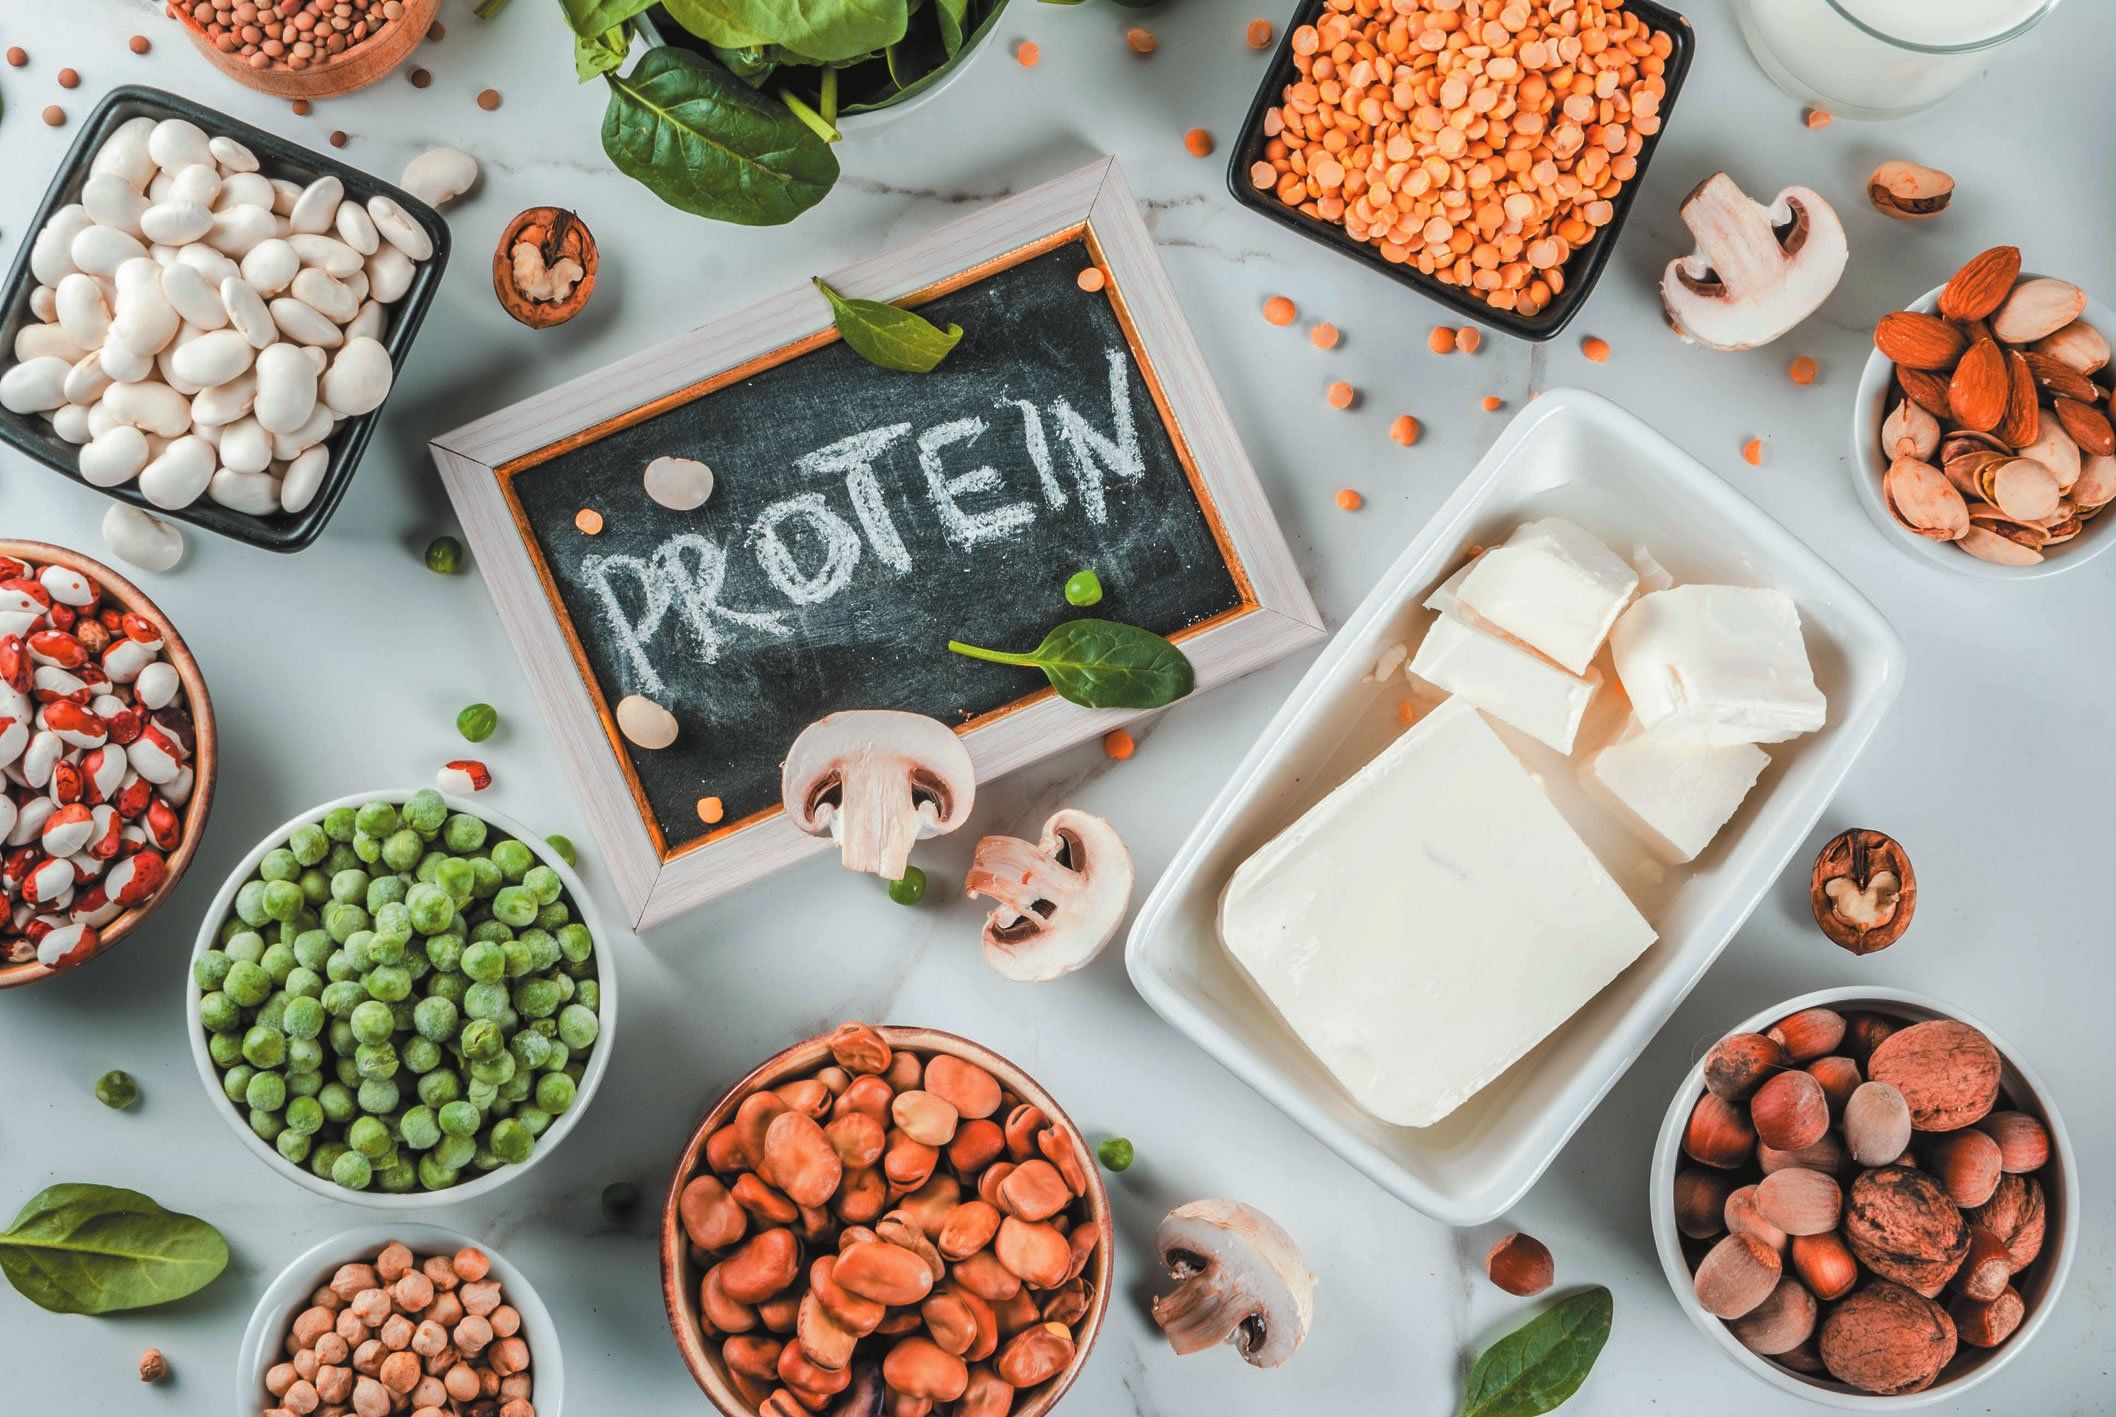 The Power of Plant-Based Proteins - Tufts Health & Nutrition Letter